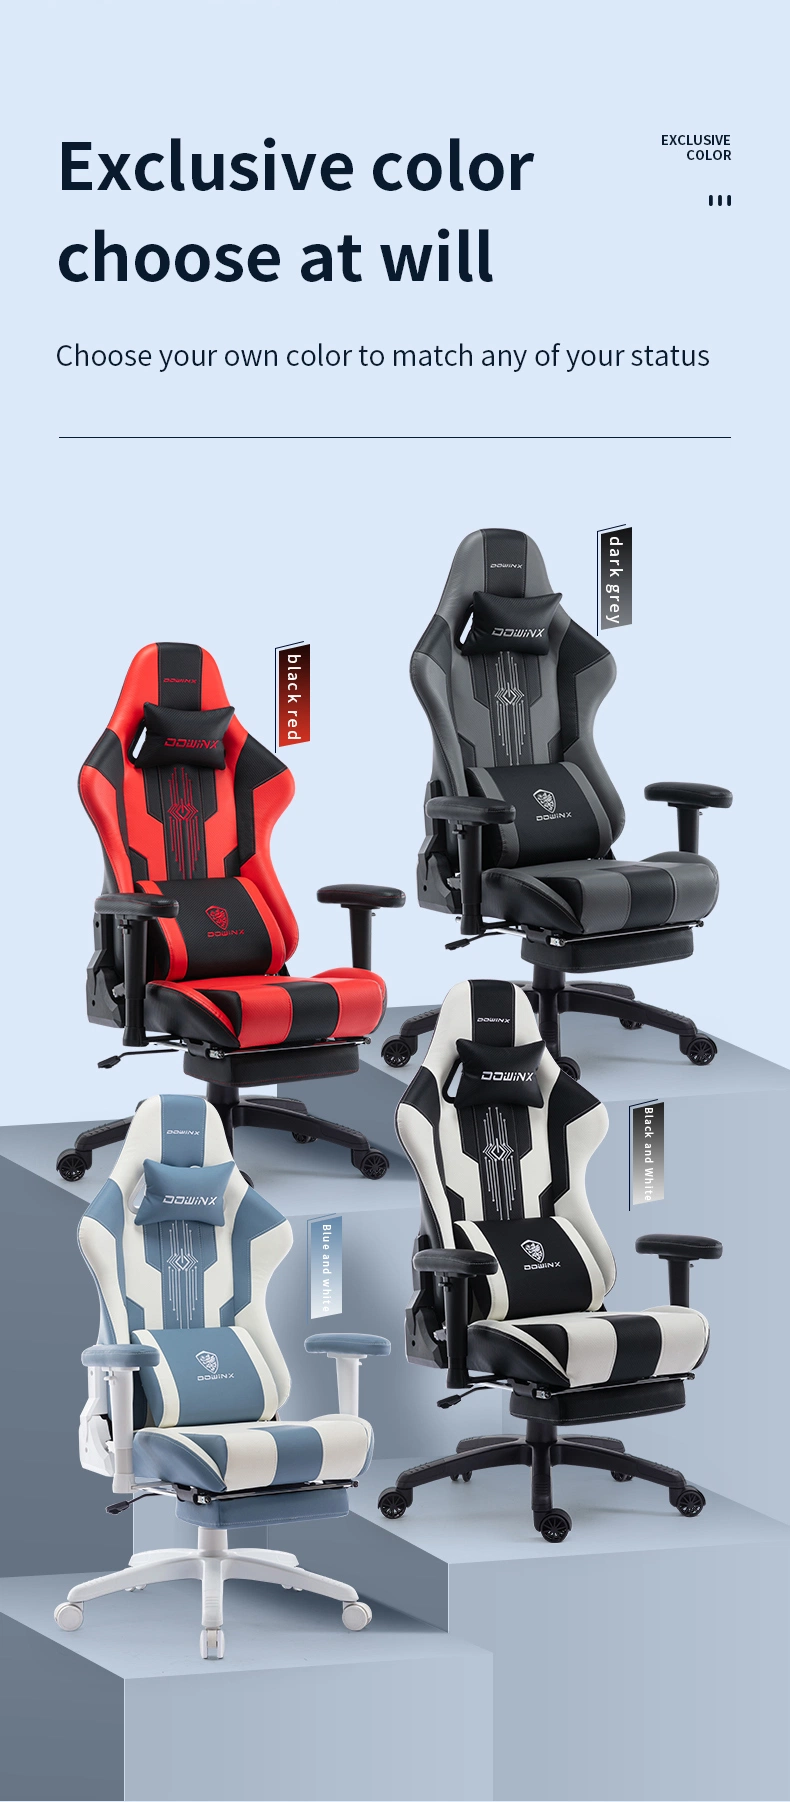 High Qualitypc Computer Large Seat Gamer Chair Noble Gaming Swivel Racing Chair